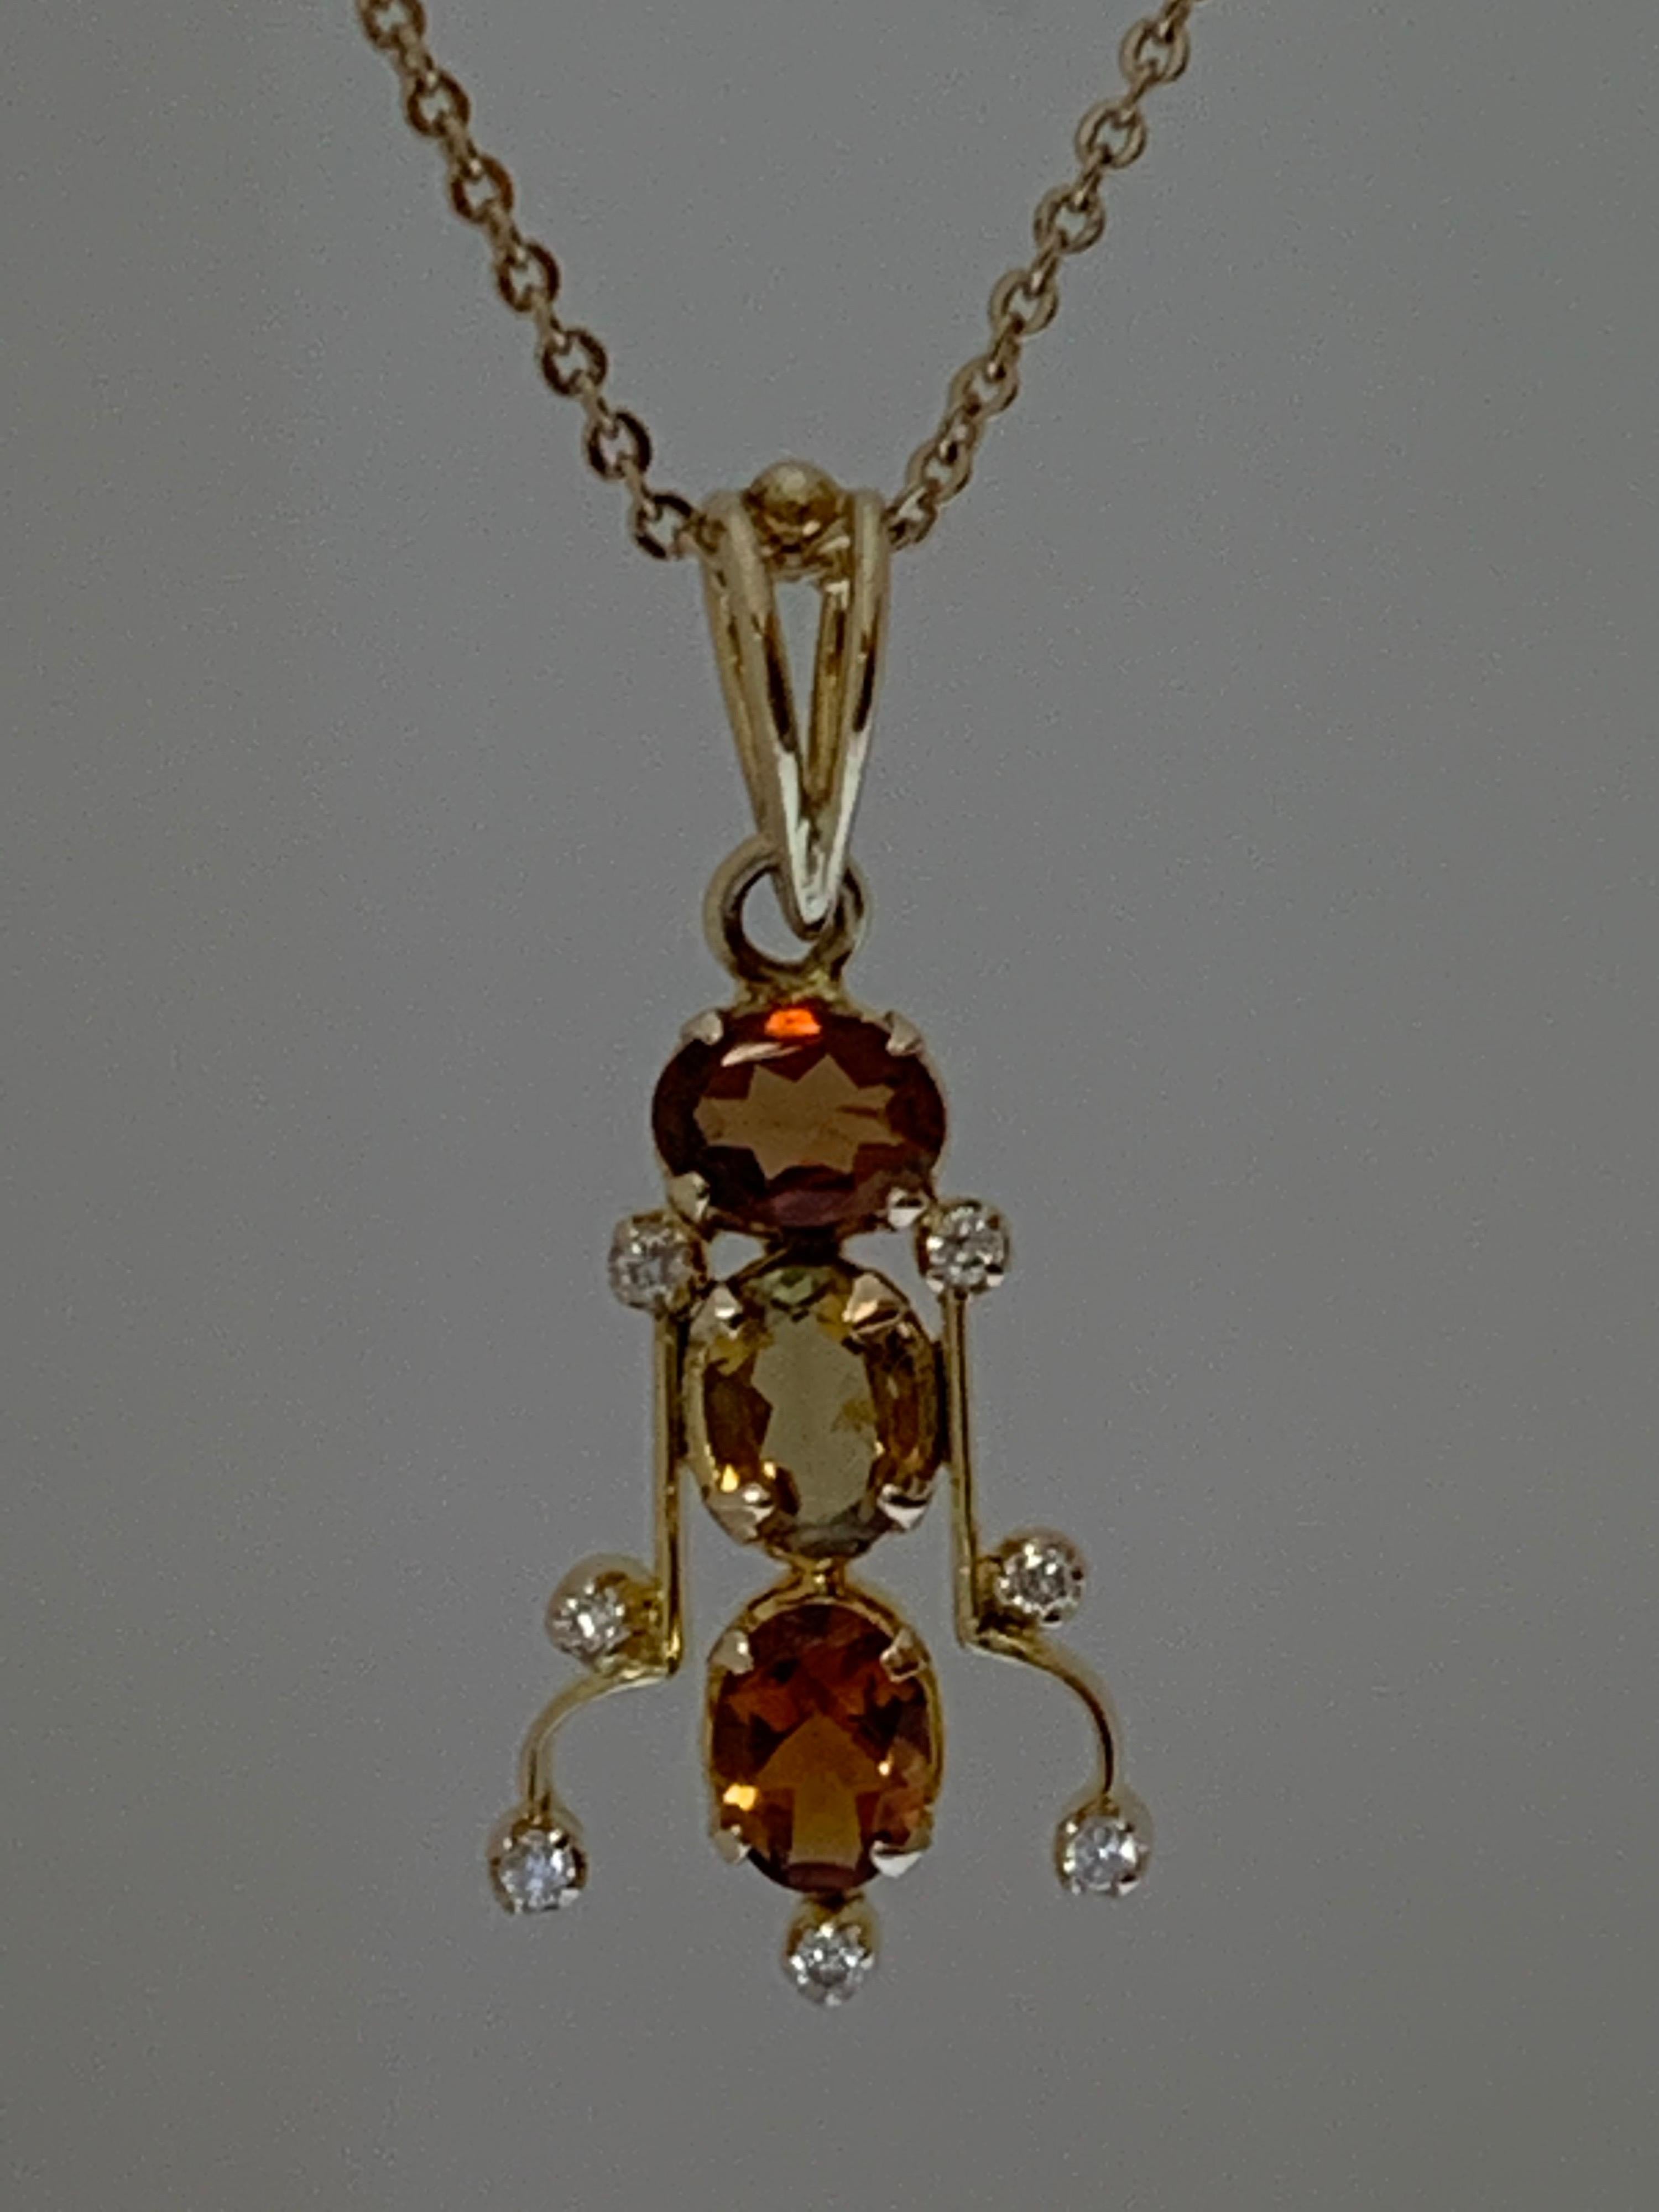 Natural 3 mm X 5 mm Tourmaline  ( 3 pcs ) and White Round diamonds set in 14 Karat Gold is one of a kind handcrafted Pendant. The stones are not treated or heated, the stone are hand cut and polished, 